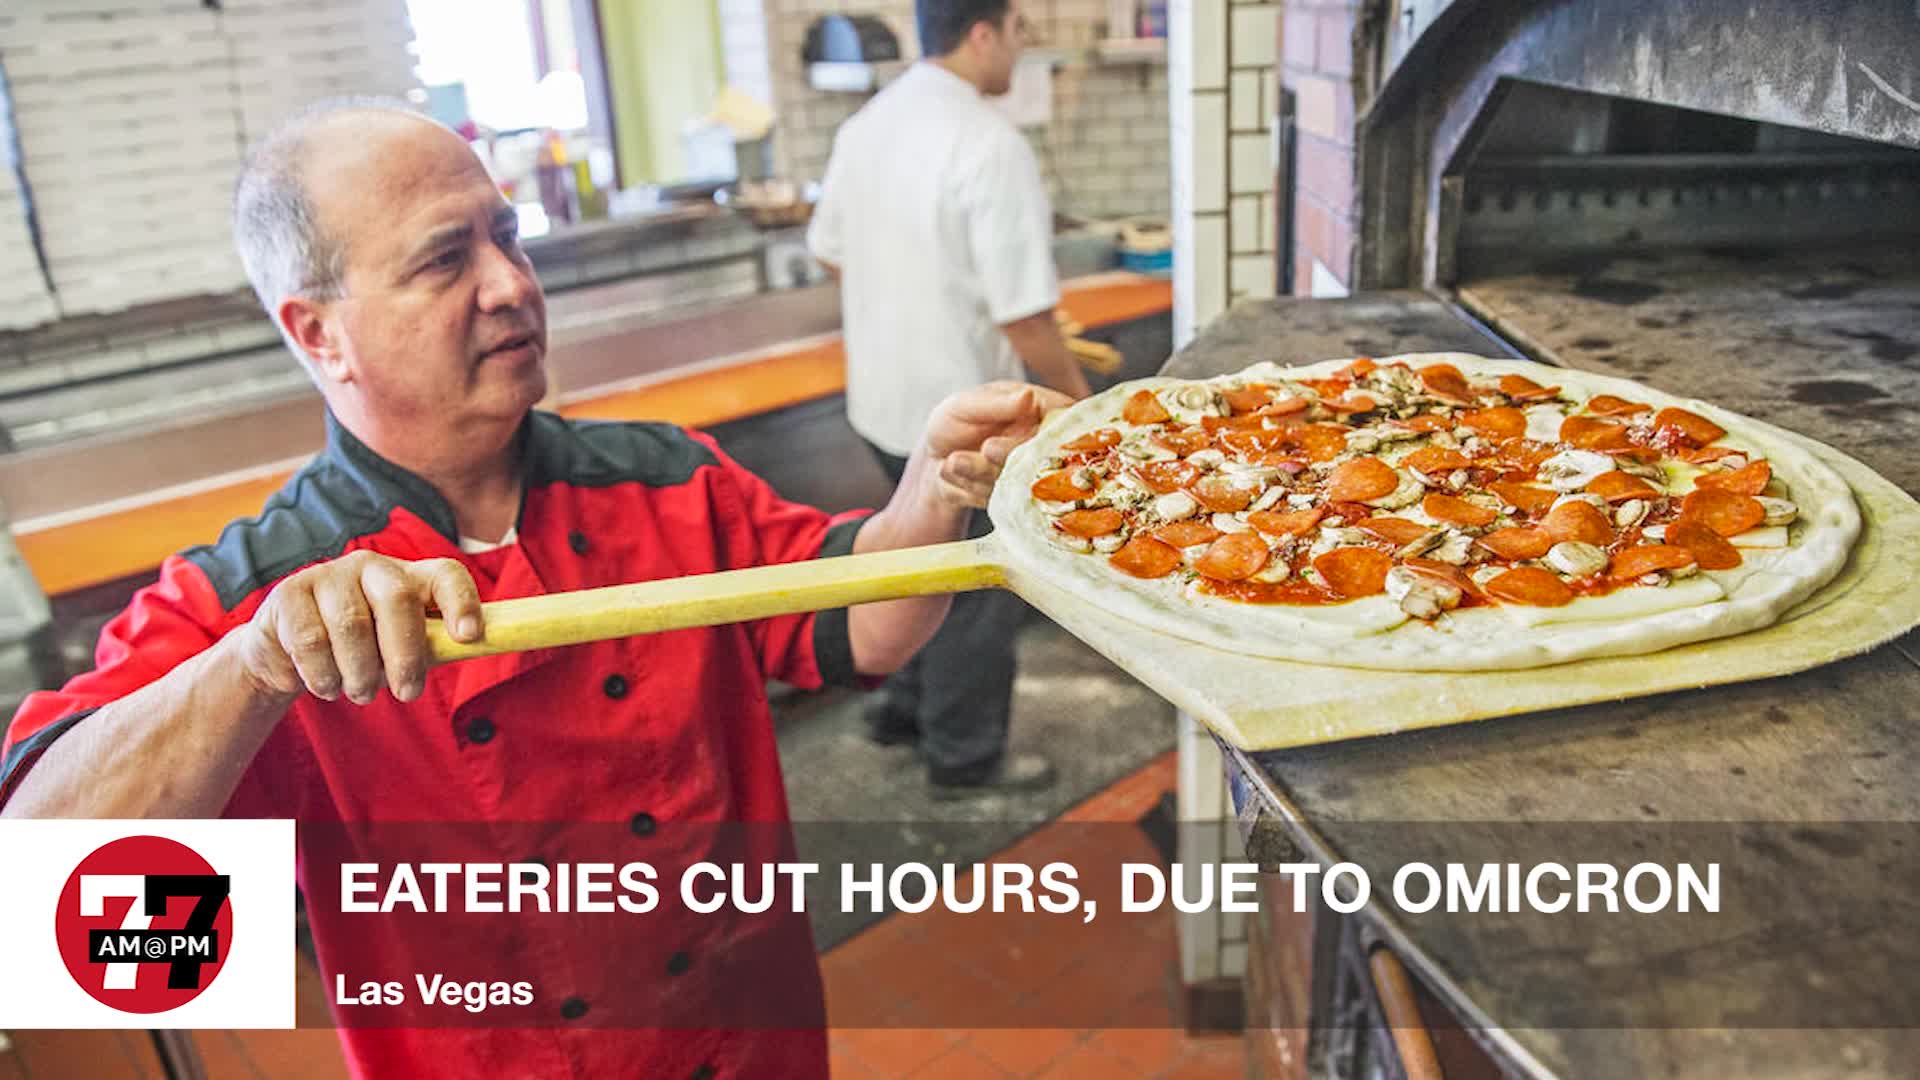 7@7PM Eateries Cut Hours, Due to Omicron